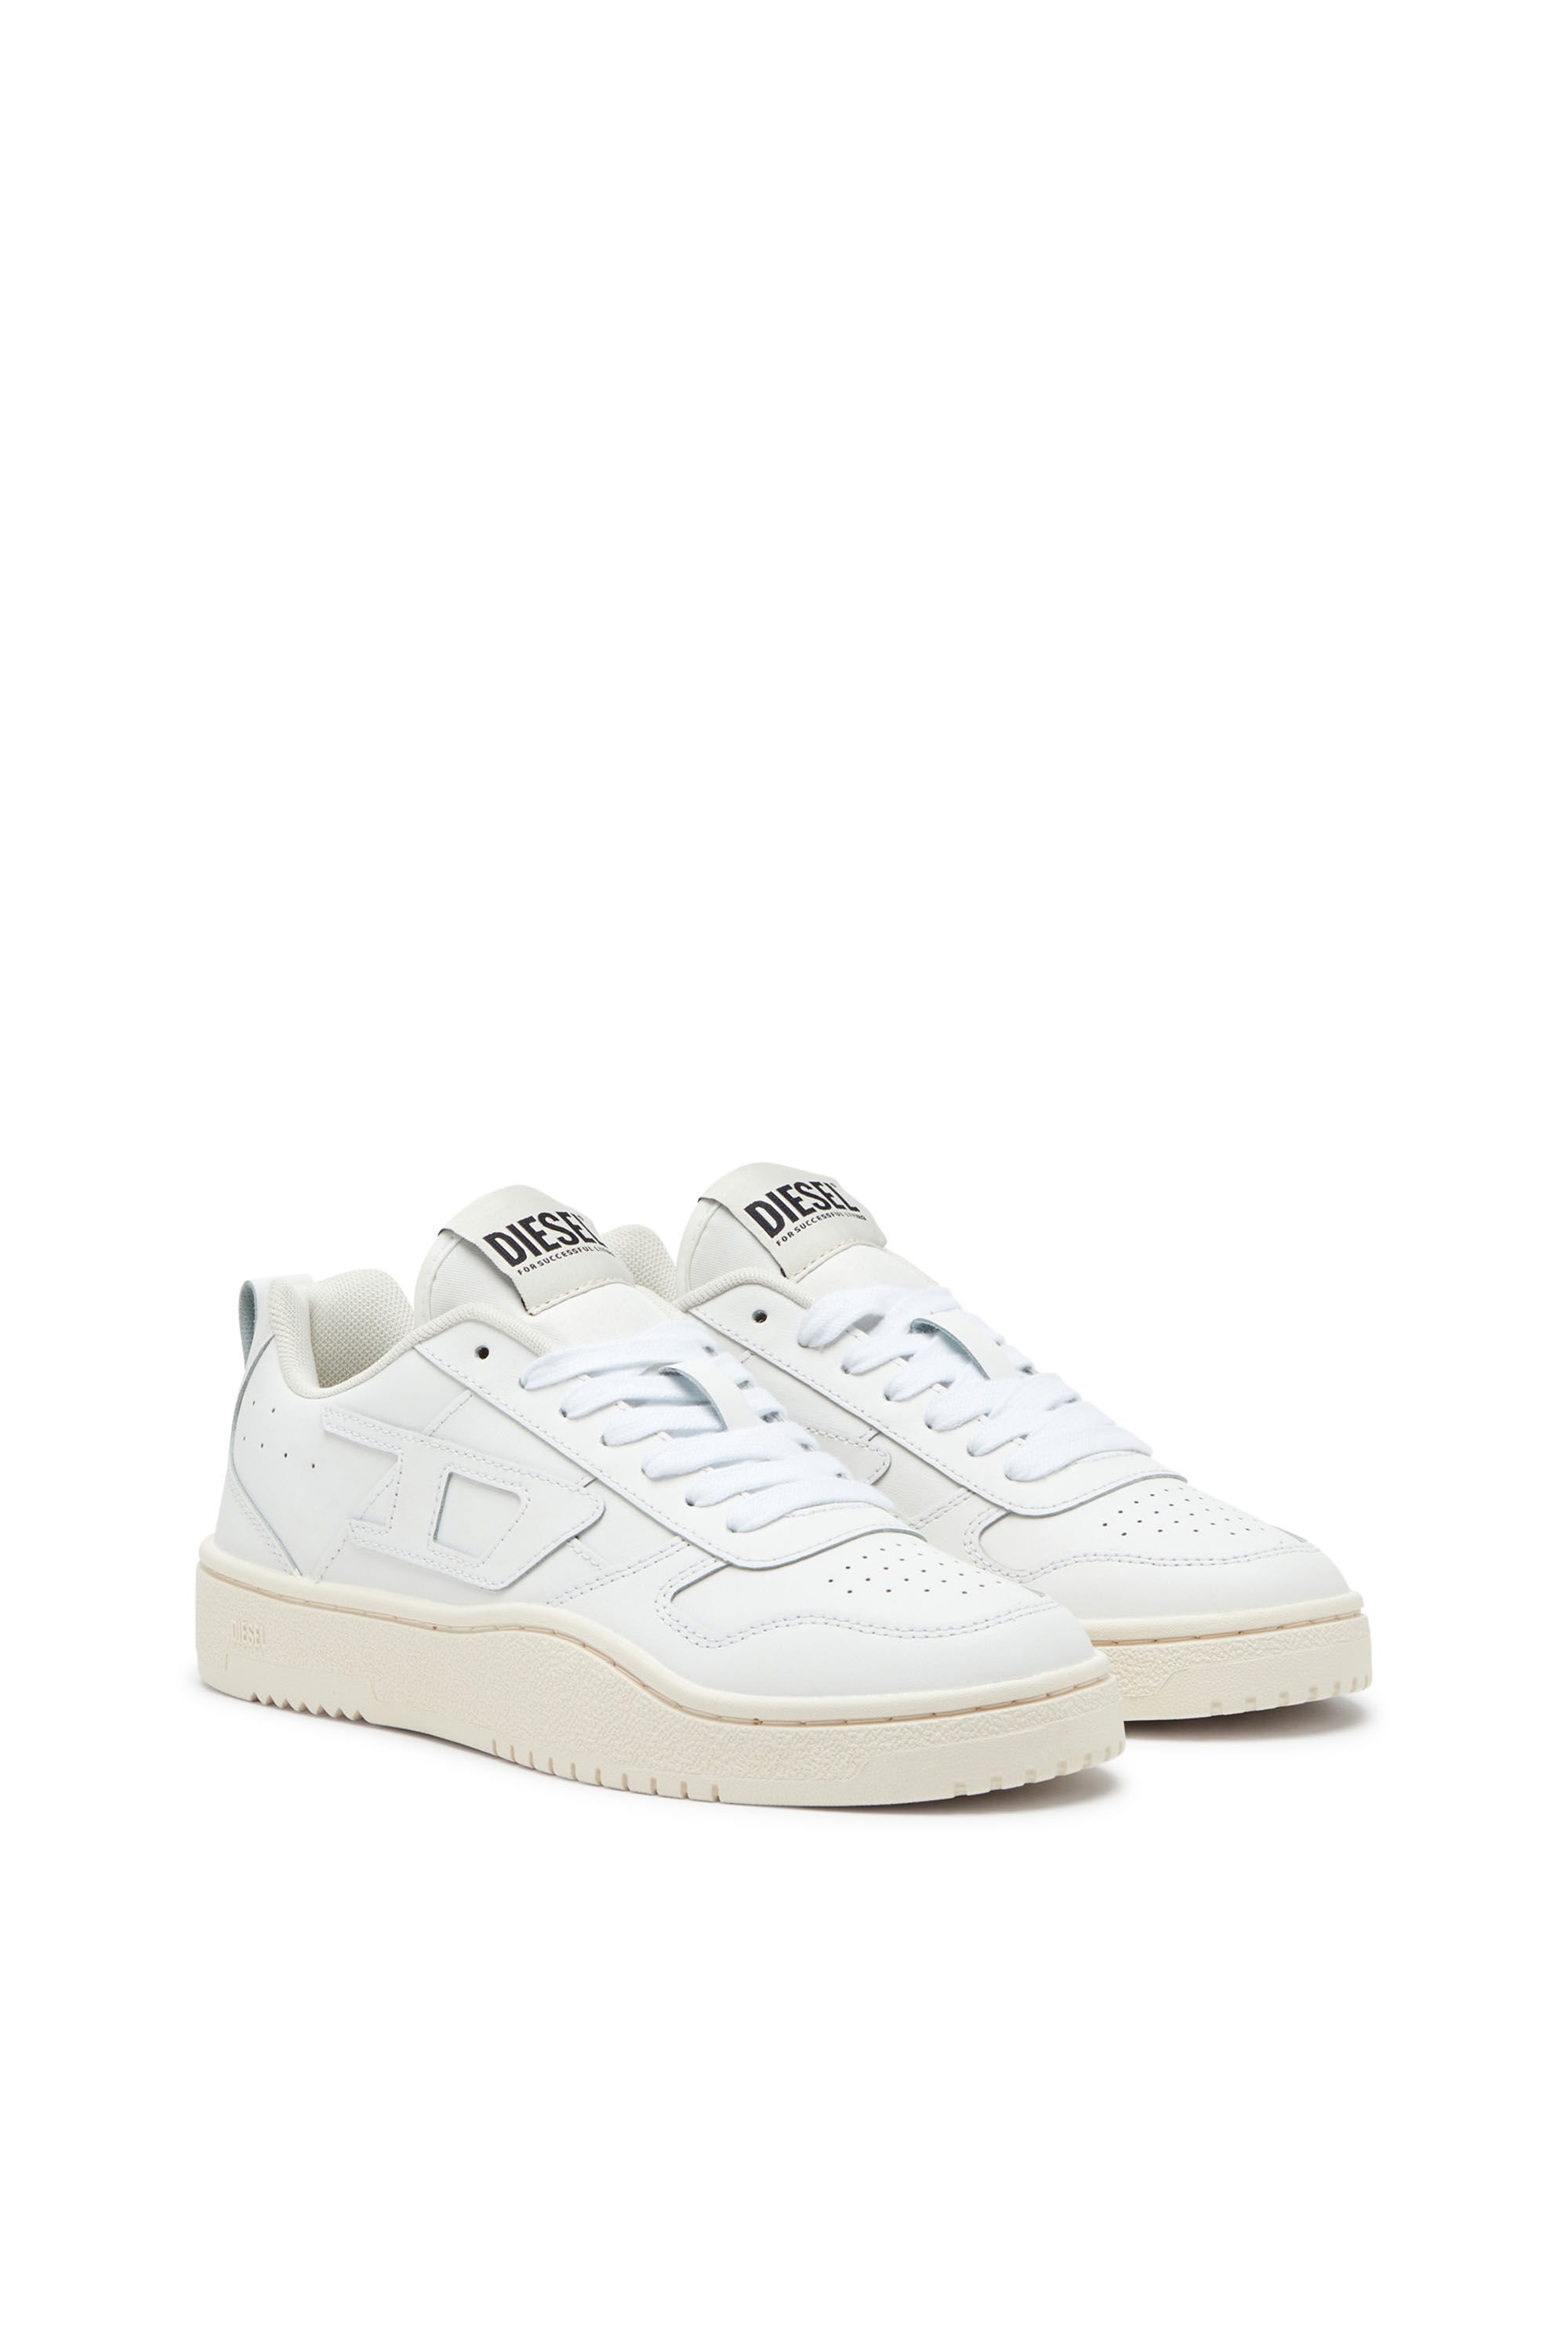 Diesel - S-UKIYO V2 LOW, Man S-Ukiyo Low-Low-top sneakers in leather and nylon in White - Image 2